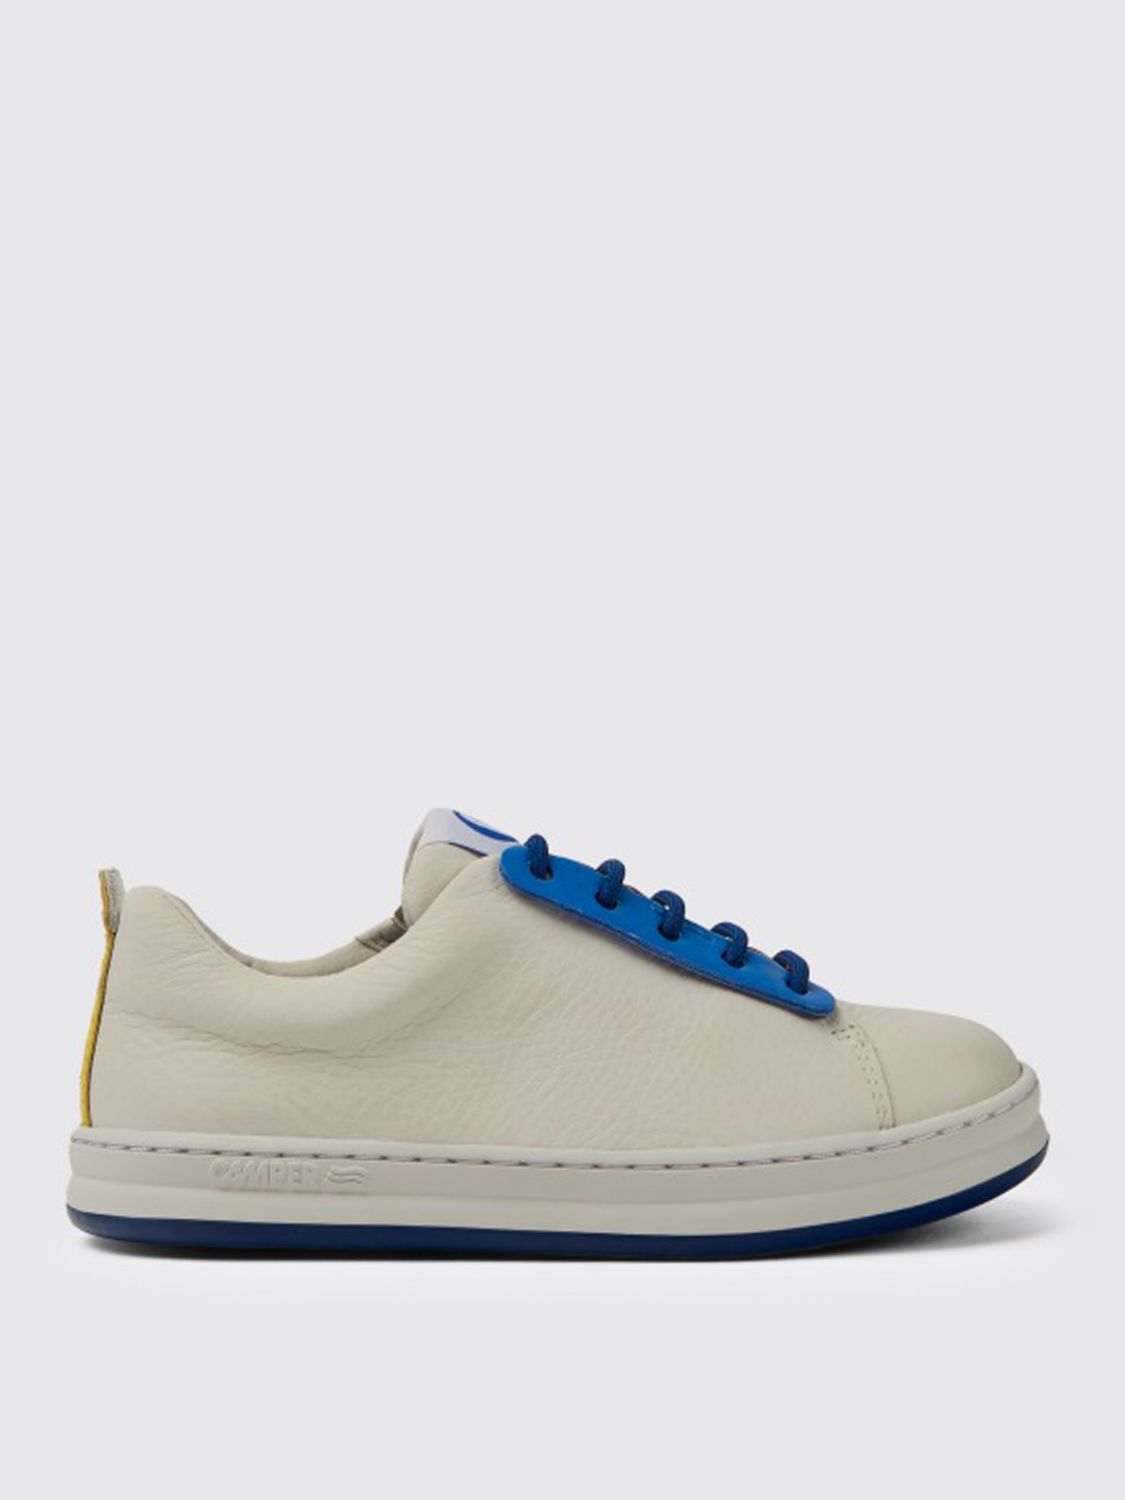 Camper Outlet: sneakers in calfskin - White | Camper shoes K800488-001 TWINS online on GIGLIO.COM